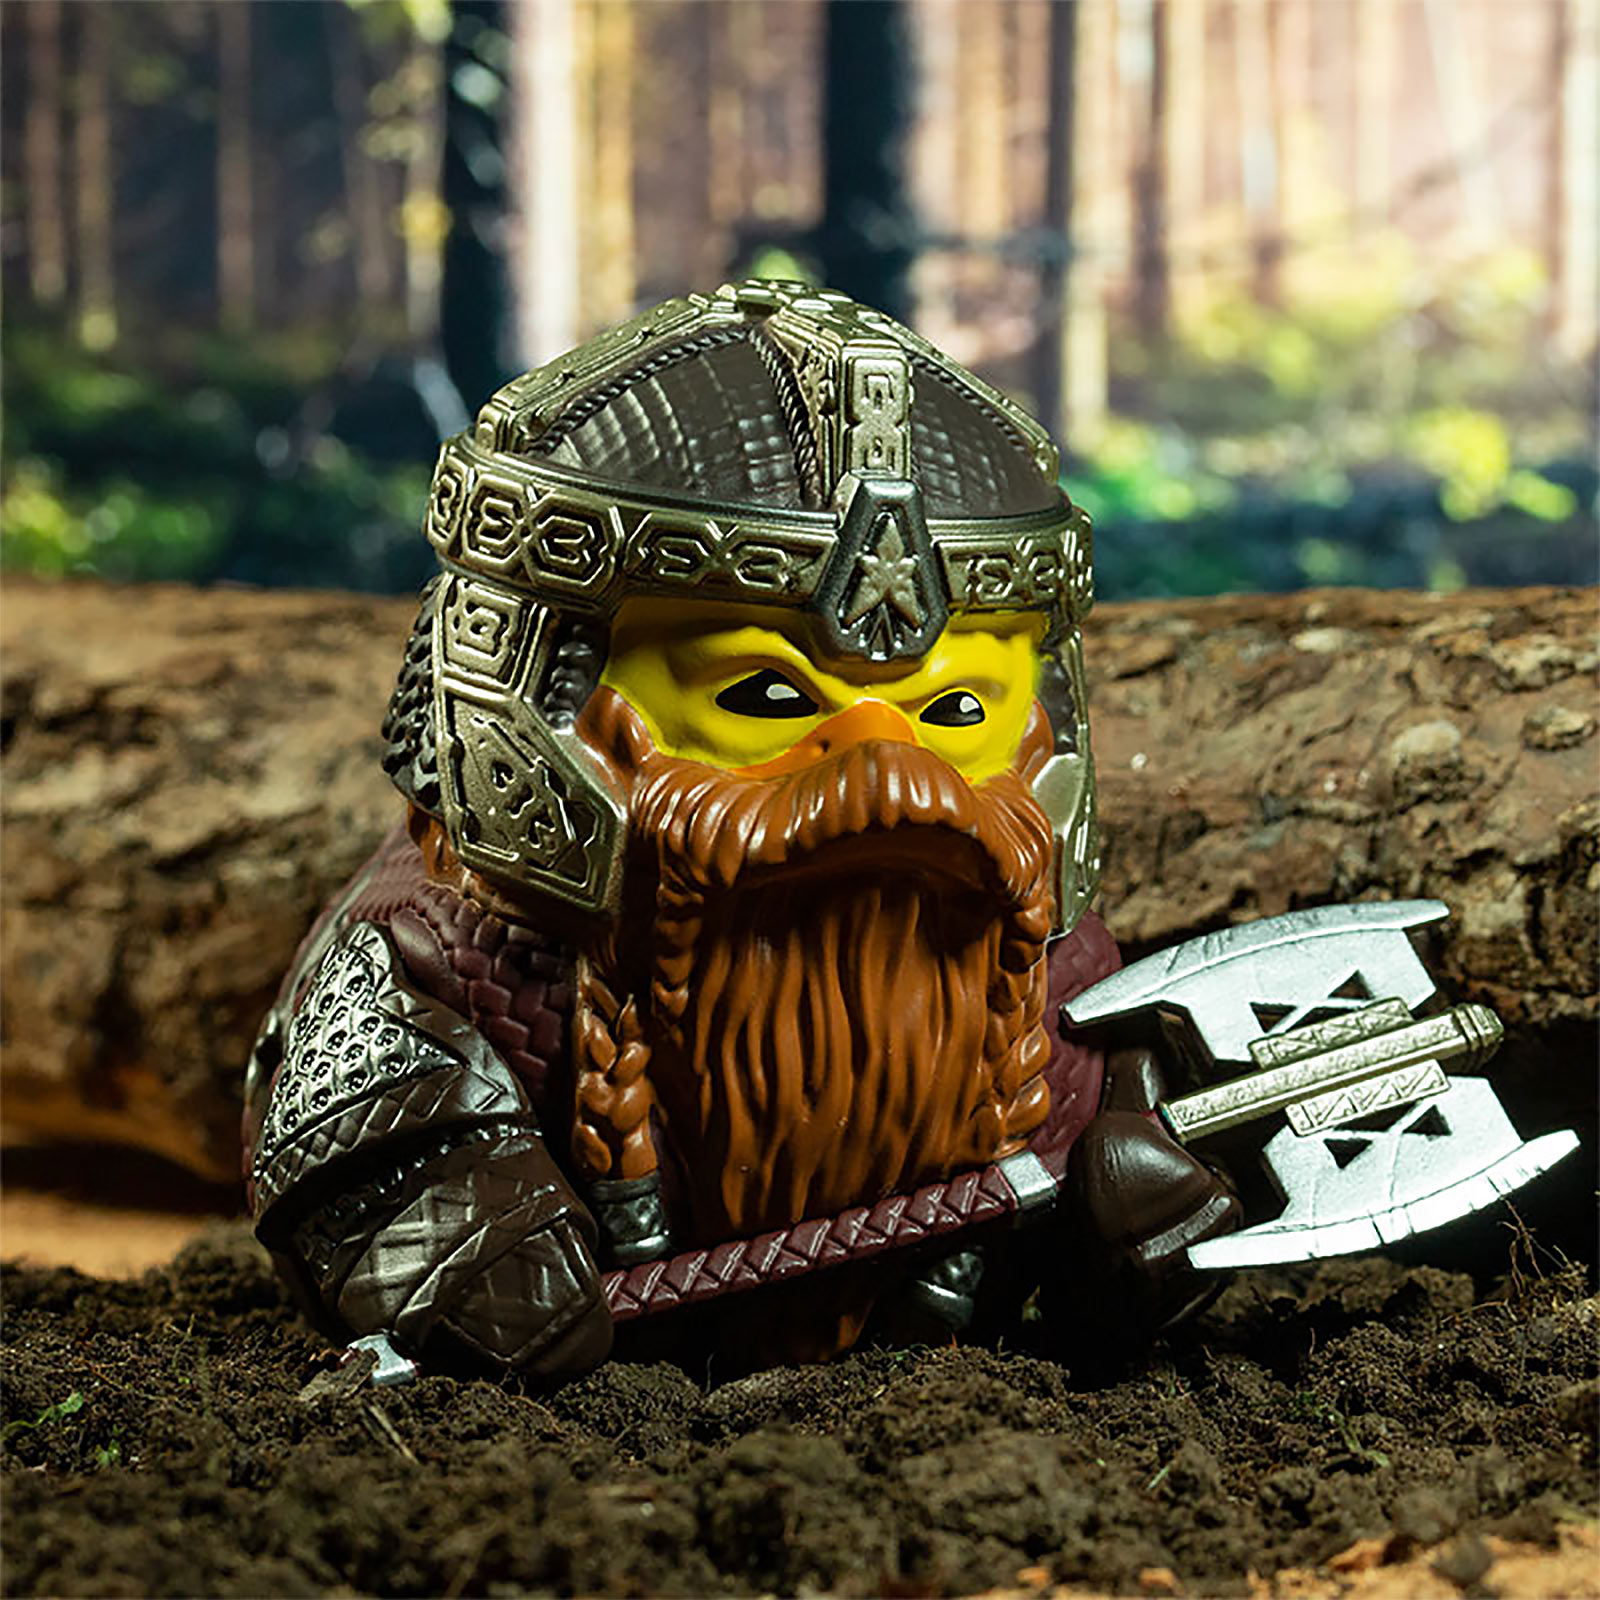 Lord of the Rings - Gimli TUBBZ Decorative Duck